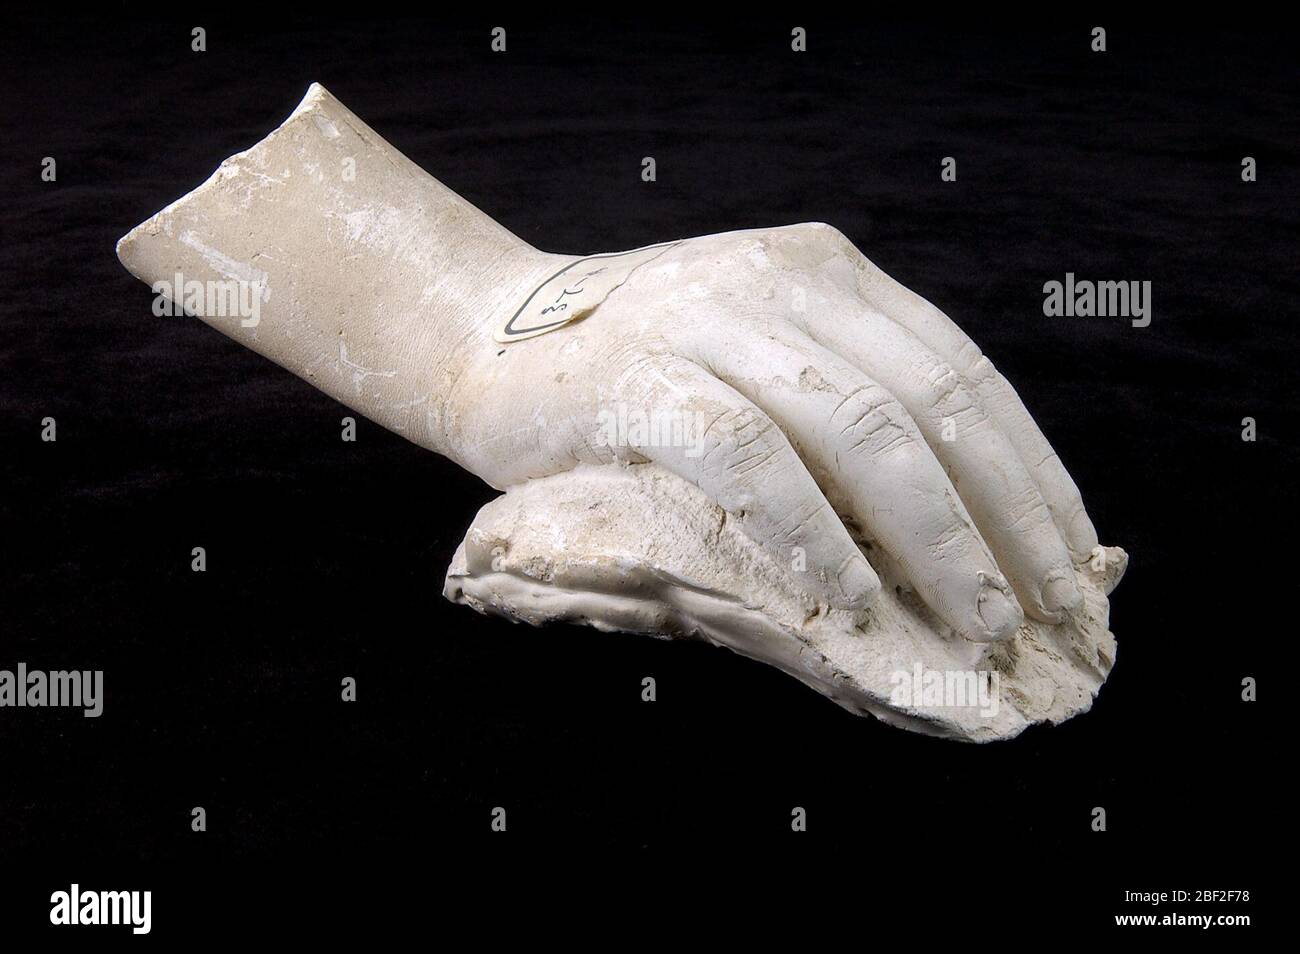 Cast of an Unidentified Right Hand in a Relaxed Position. There are many plaster fragments of anatomical details in the Hiram Powers collection that cannot be identified. Stock Photo